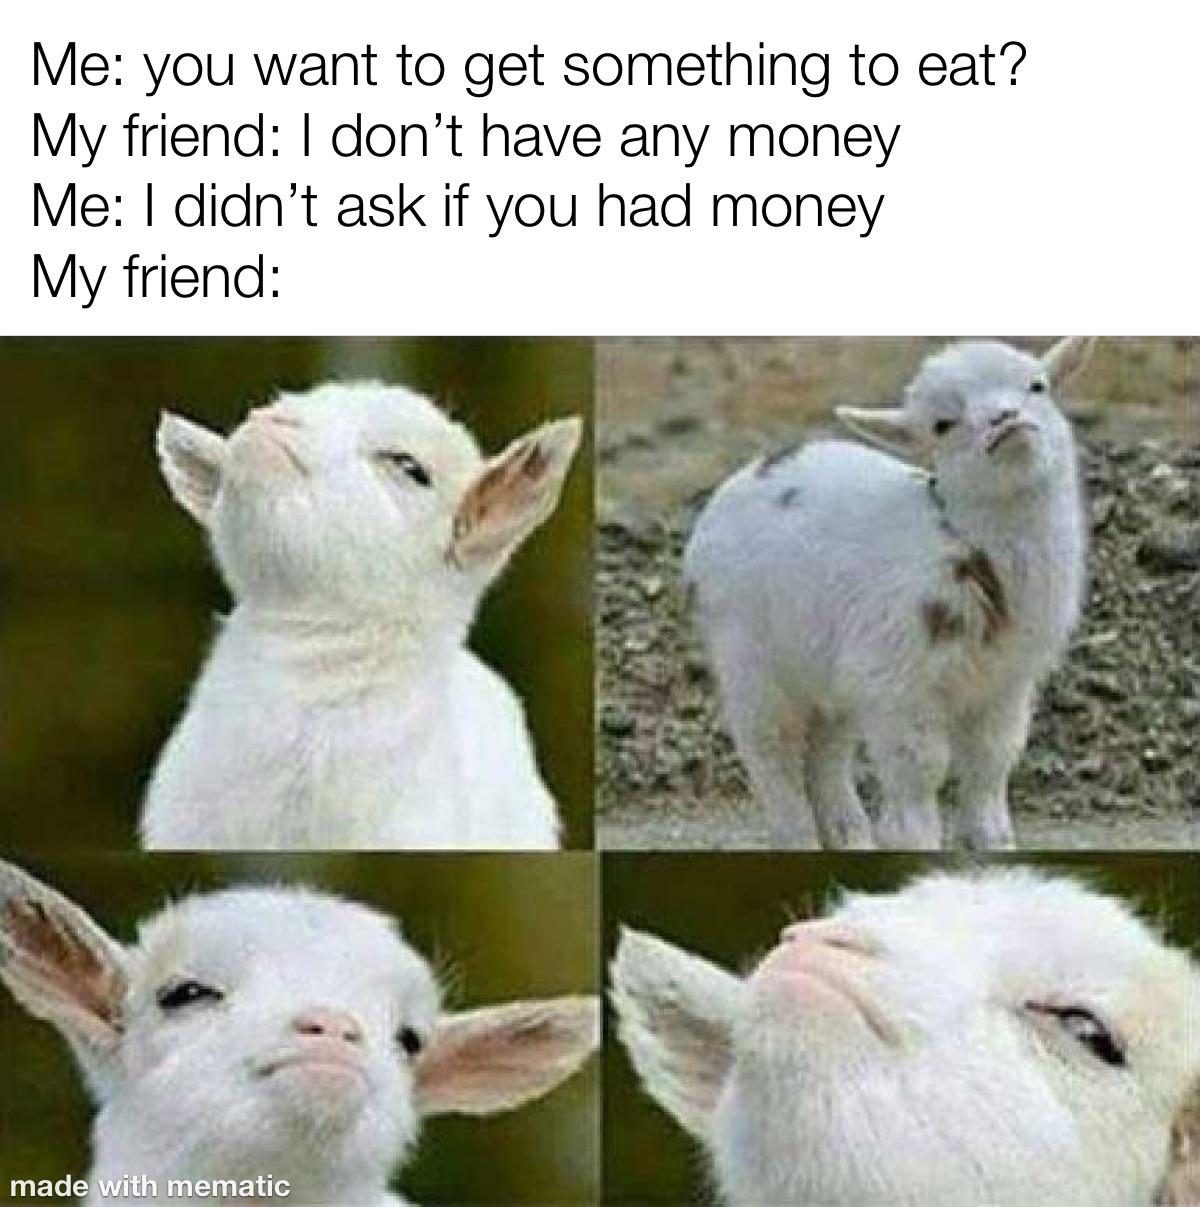 Wholesome memes, Friends Wholesome Memes Wholesome memes, Friends text: Me: you want to get something to eat? My friend: I don't have any money Me: I didn't ask if you had money My friend: made ith mematic 